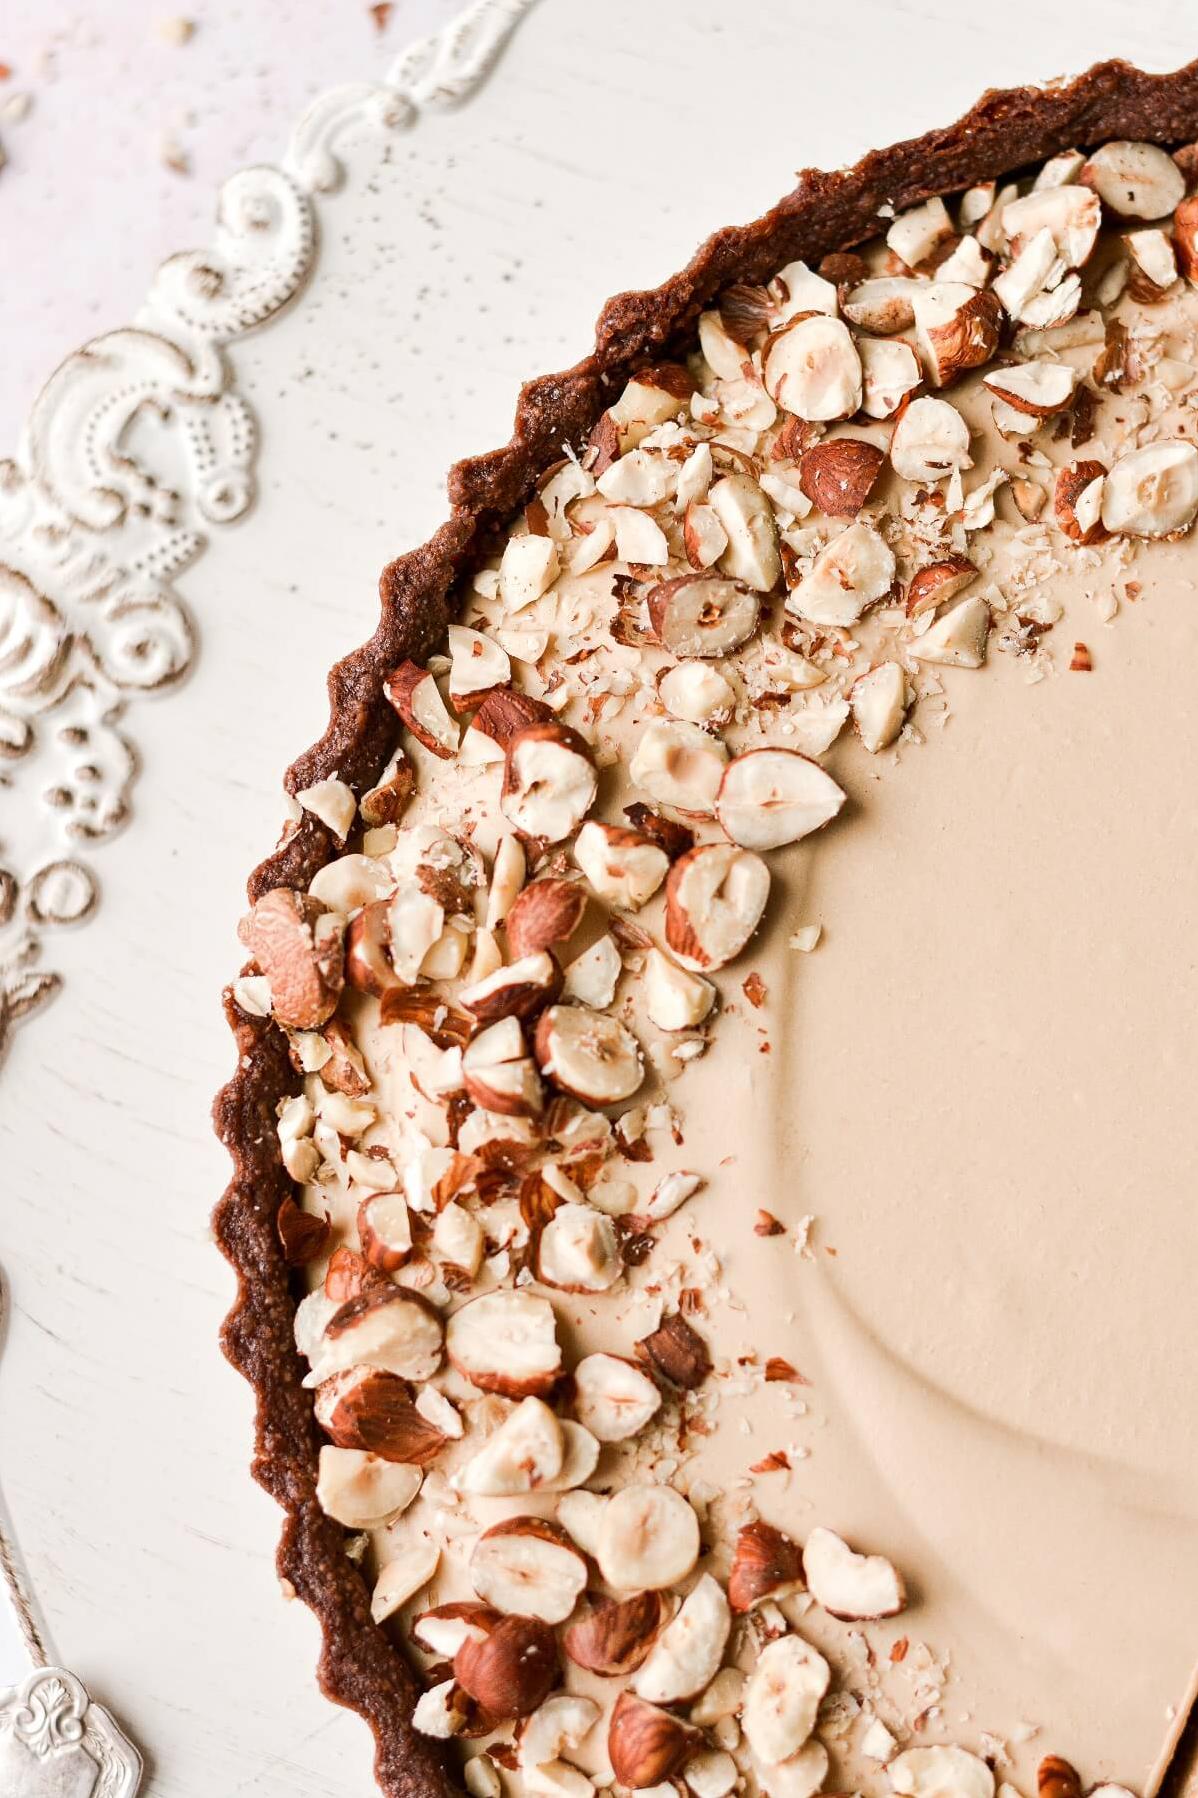  The almond crust adds a delightful crunch to this smooth and creamy pie.